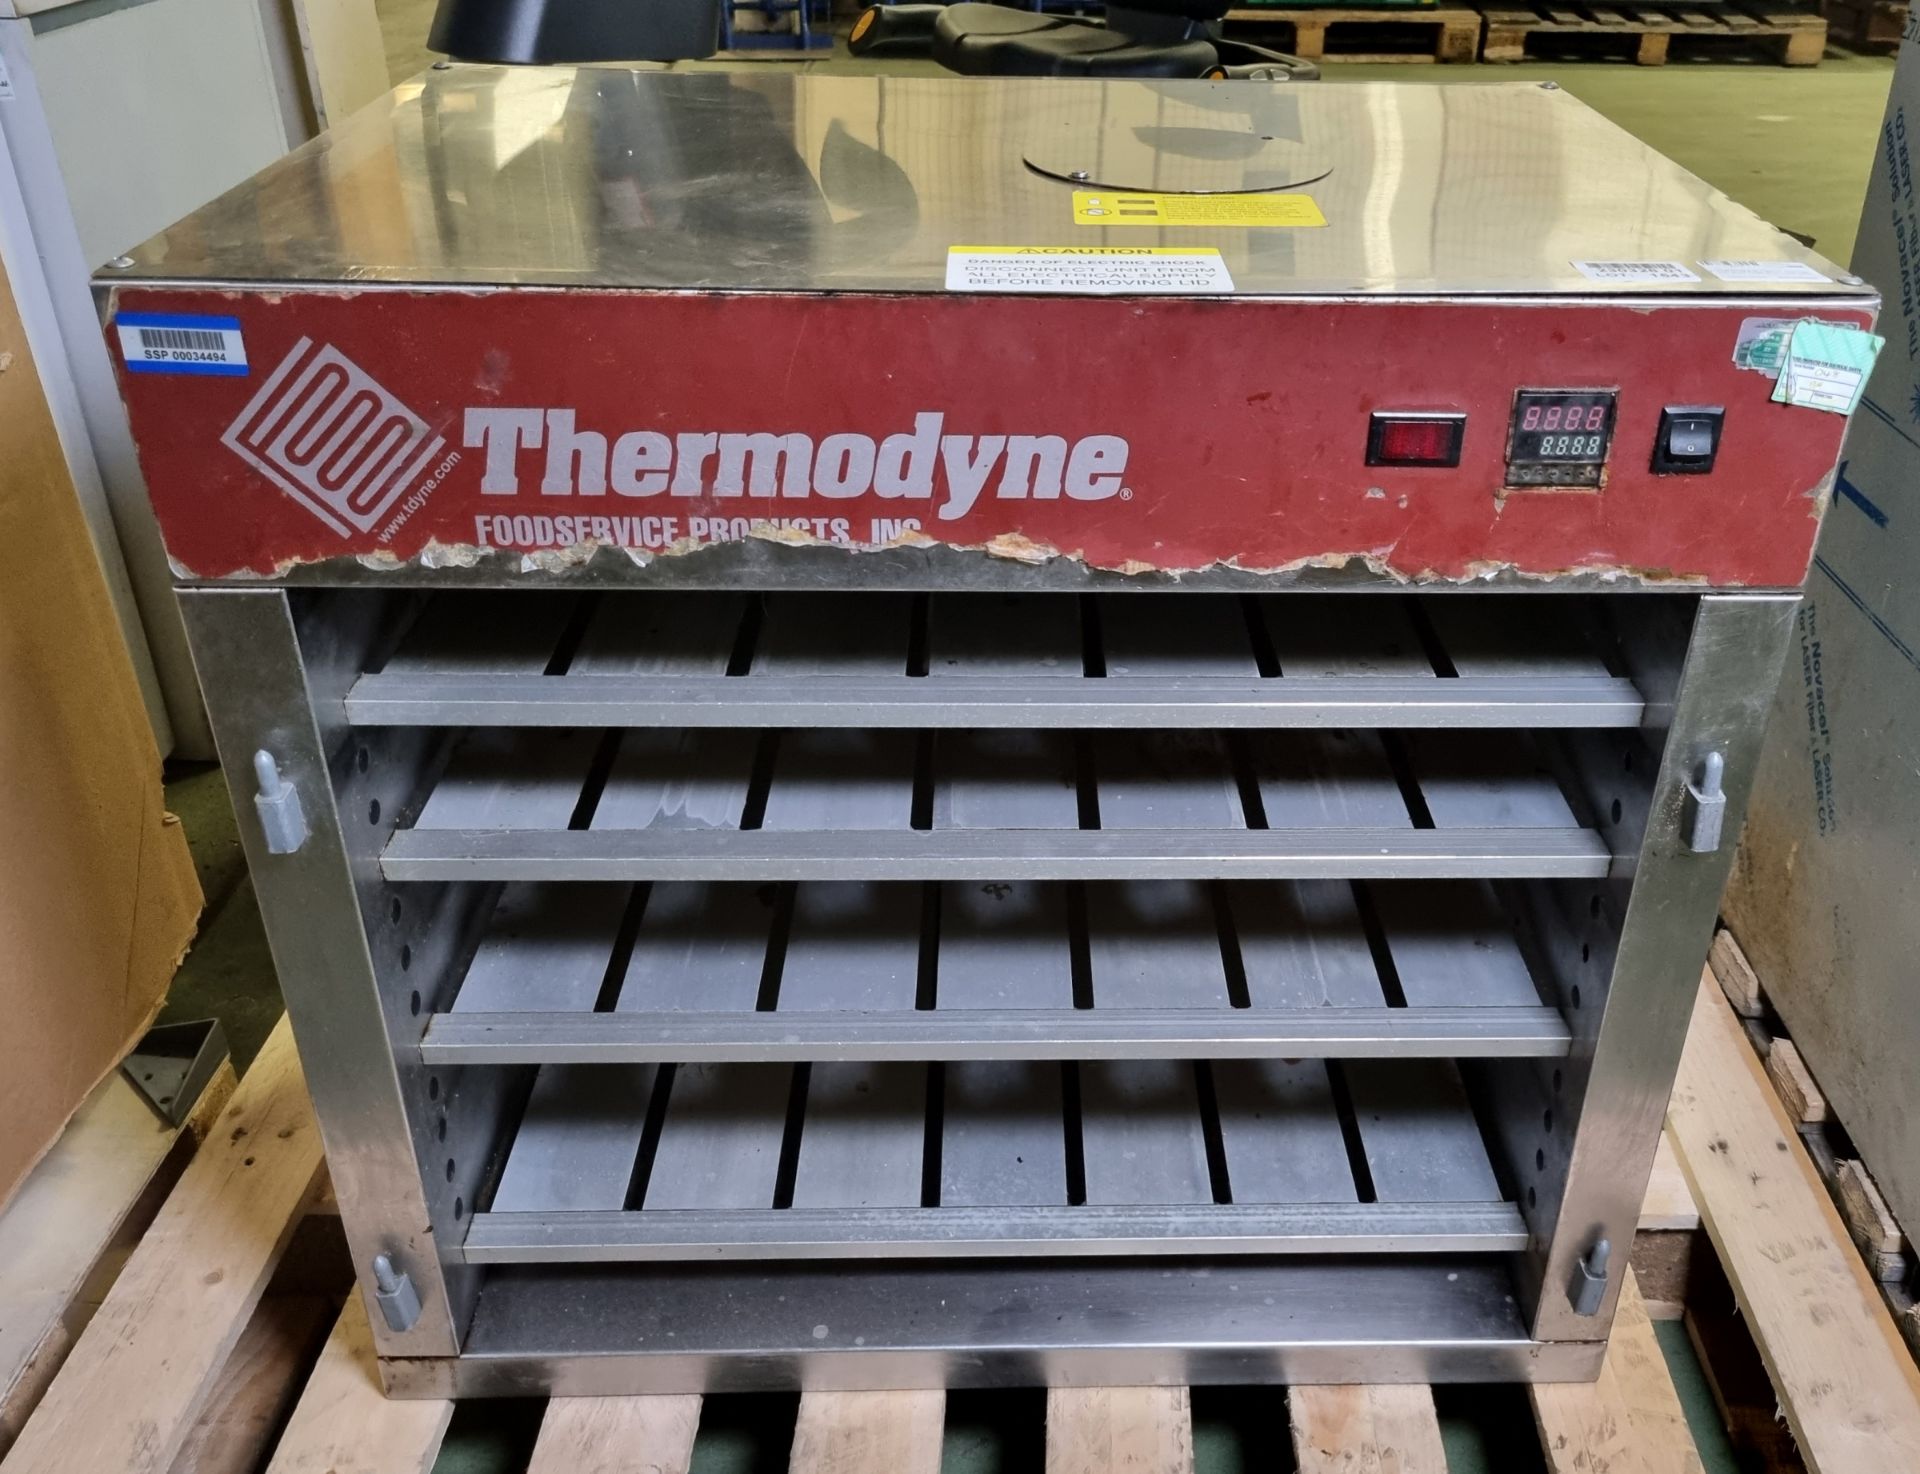 Thermodyne 700CT counter top slow cook and hold oven (missing doors) - 7800mm W